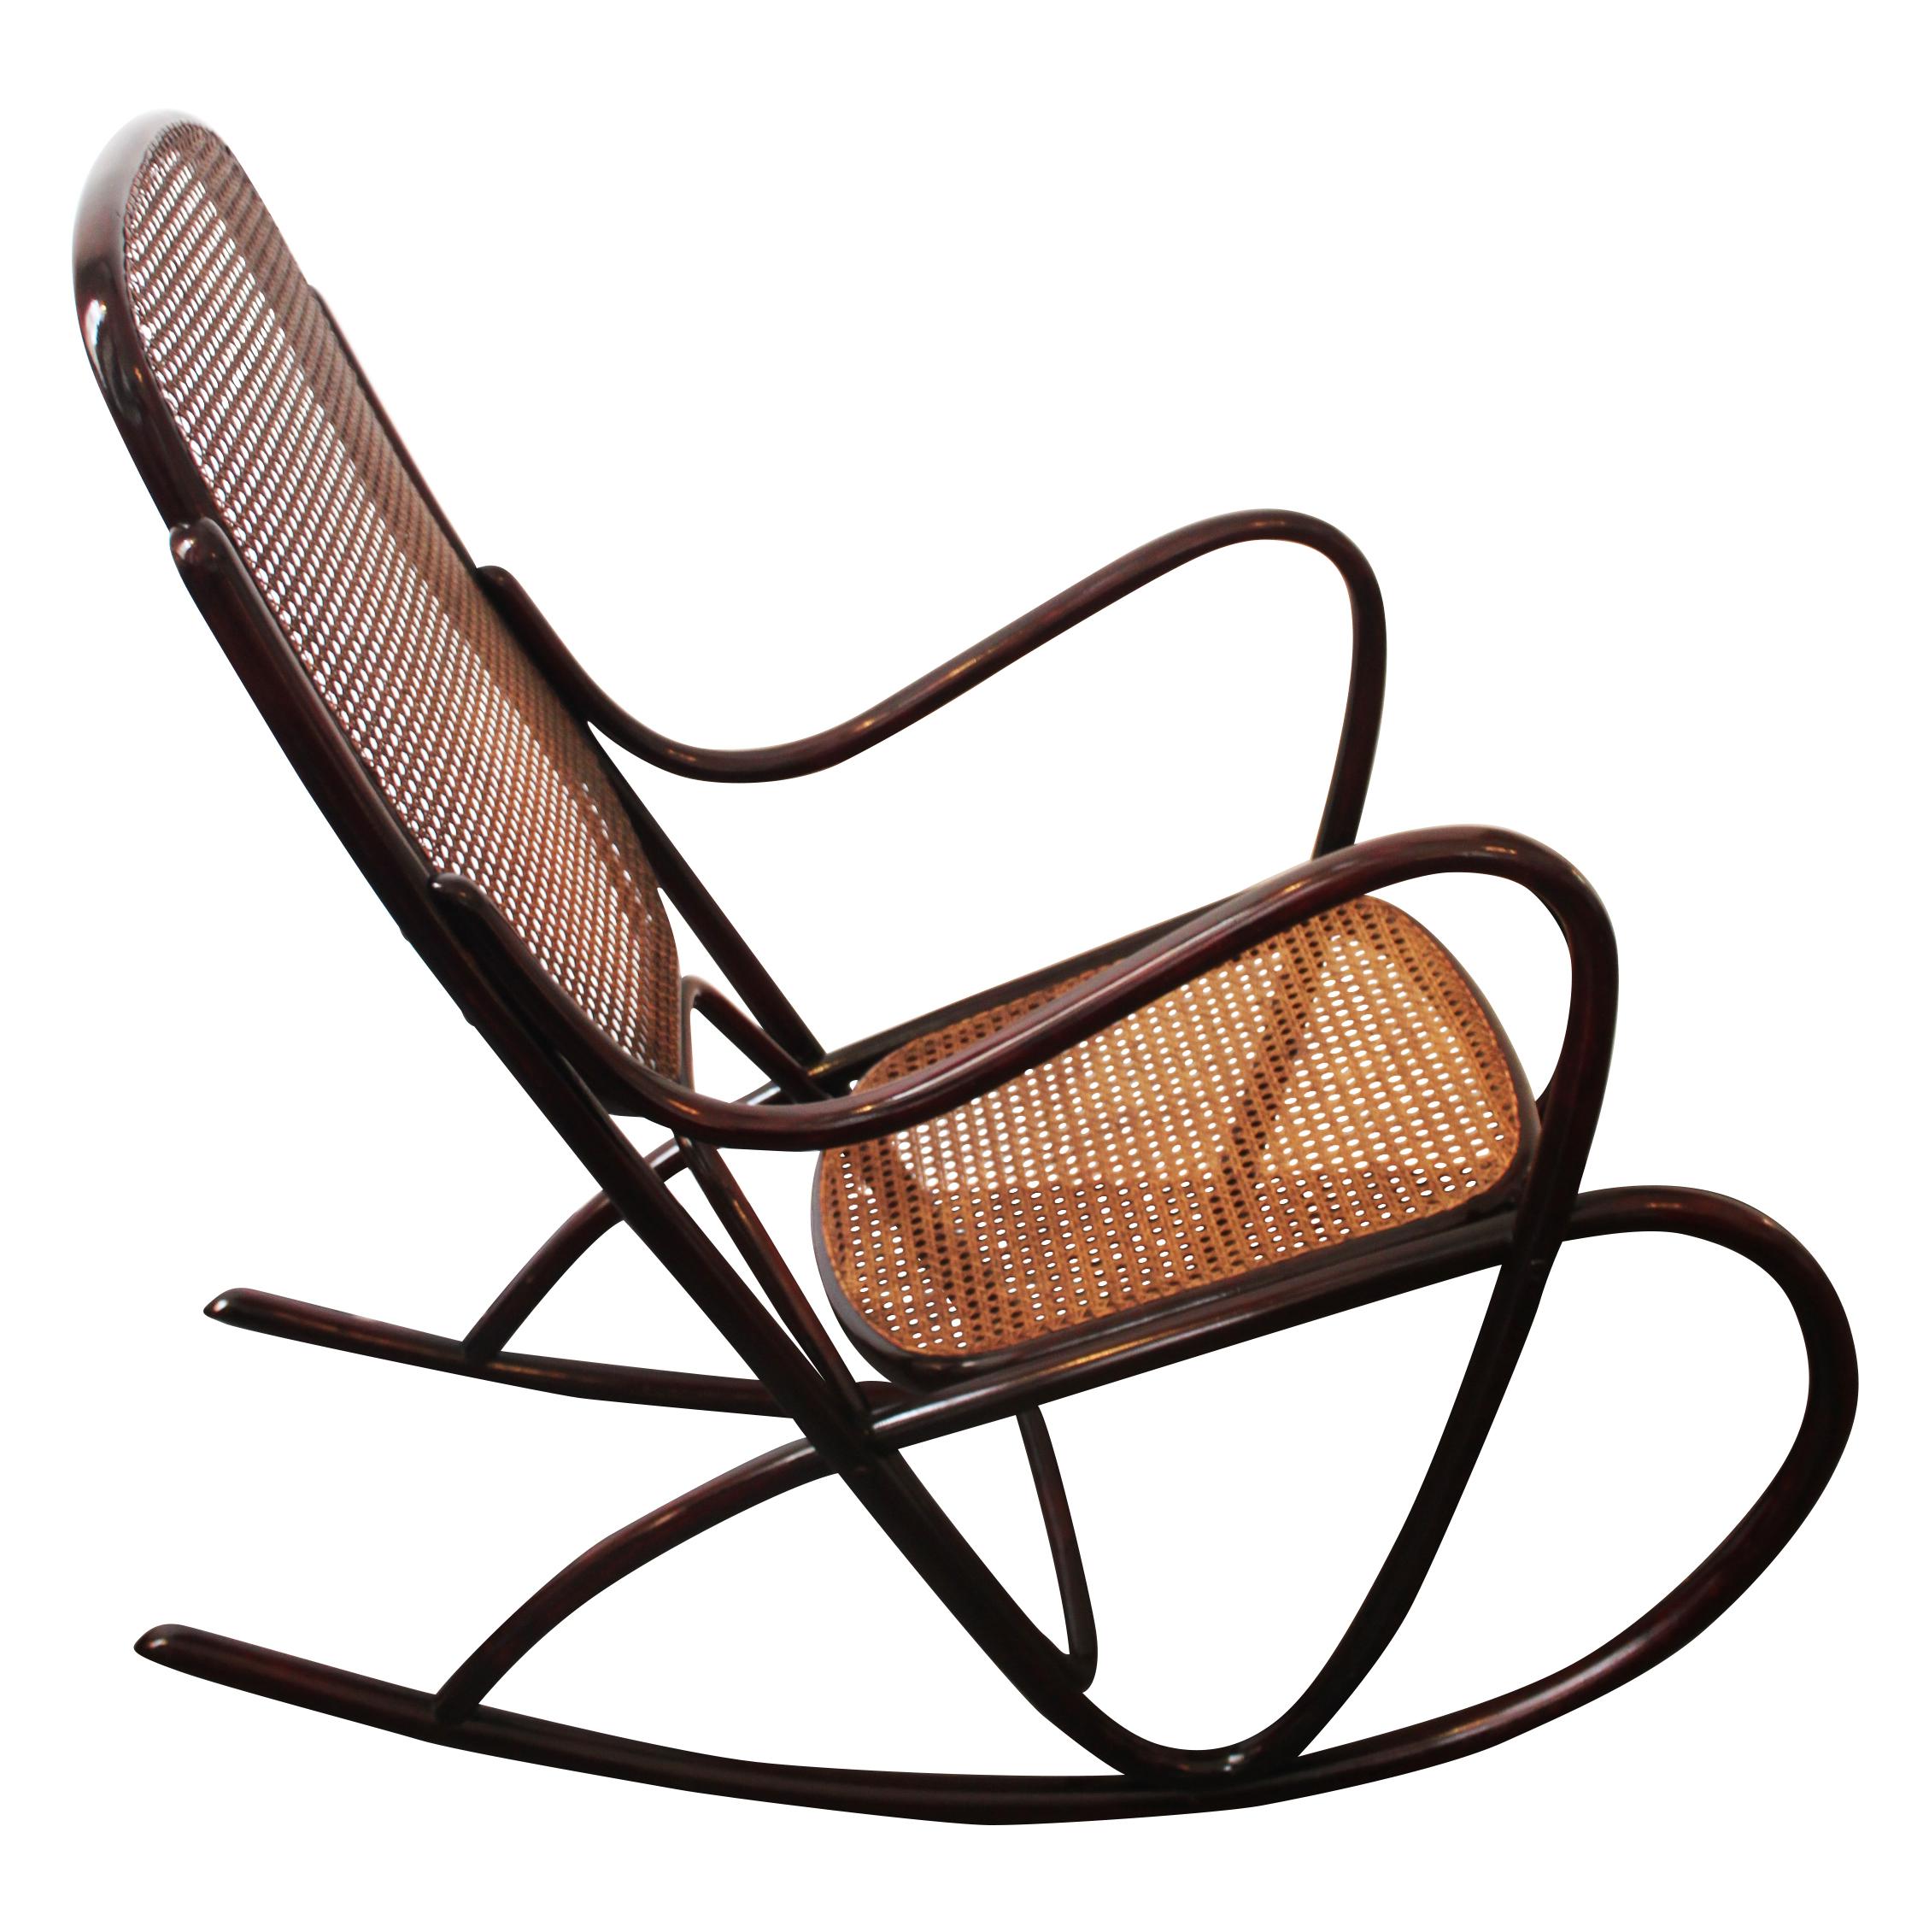 Vintage model 7091 rocking chair from Thonet.